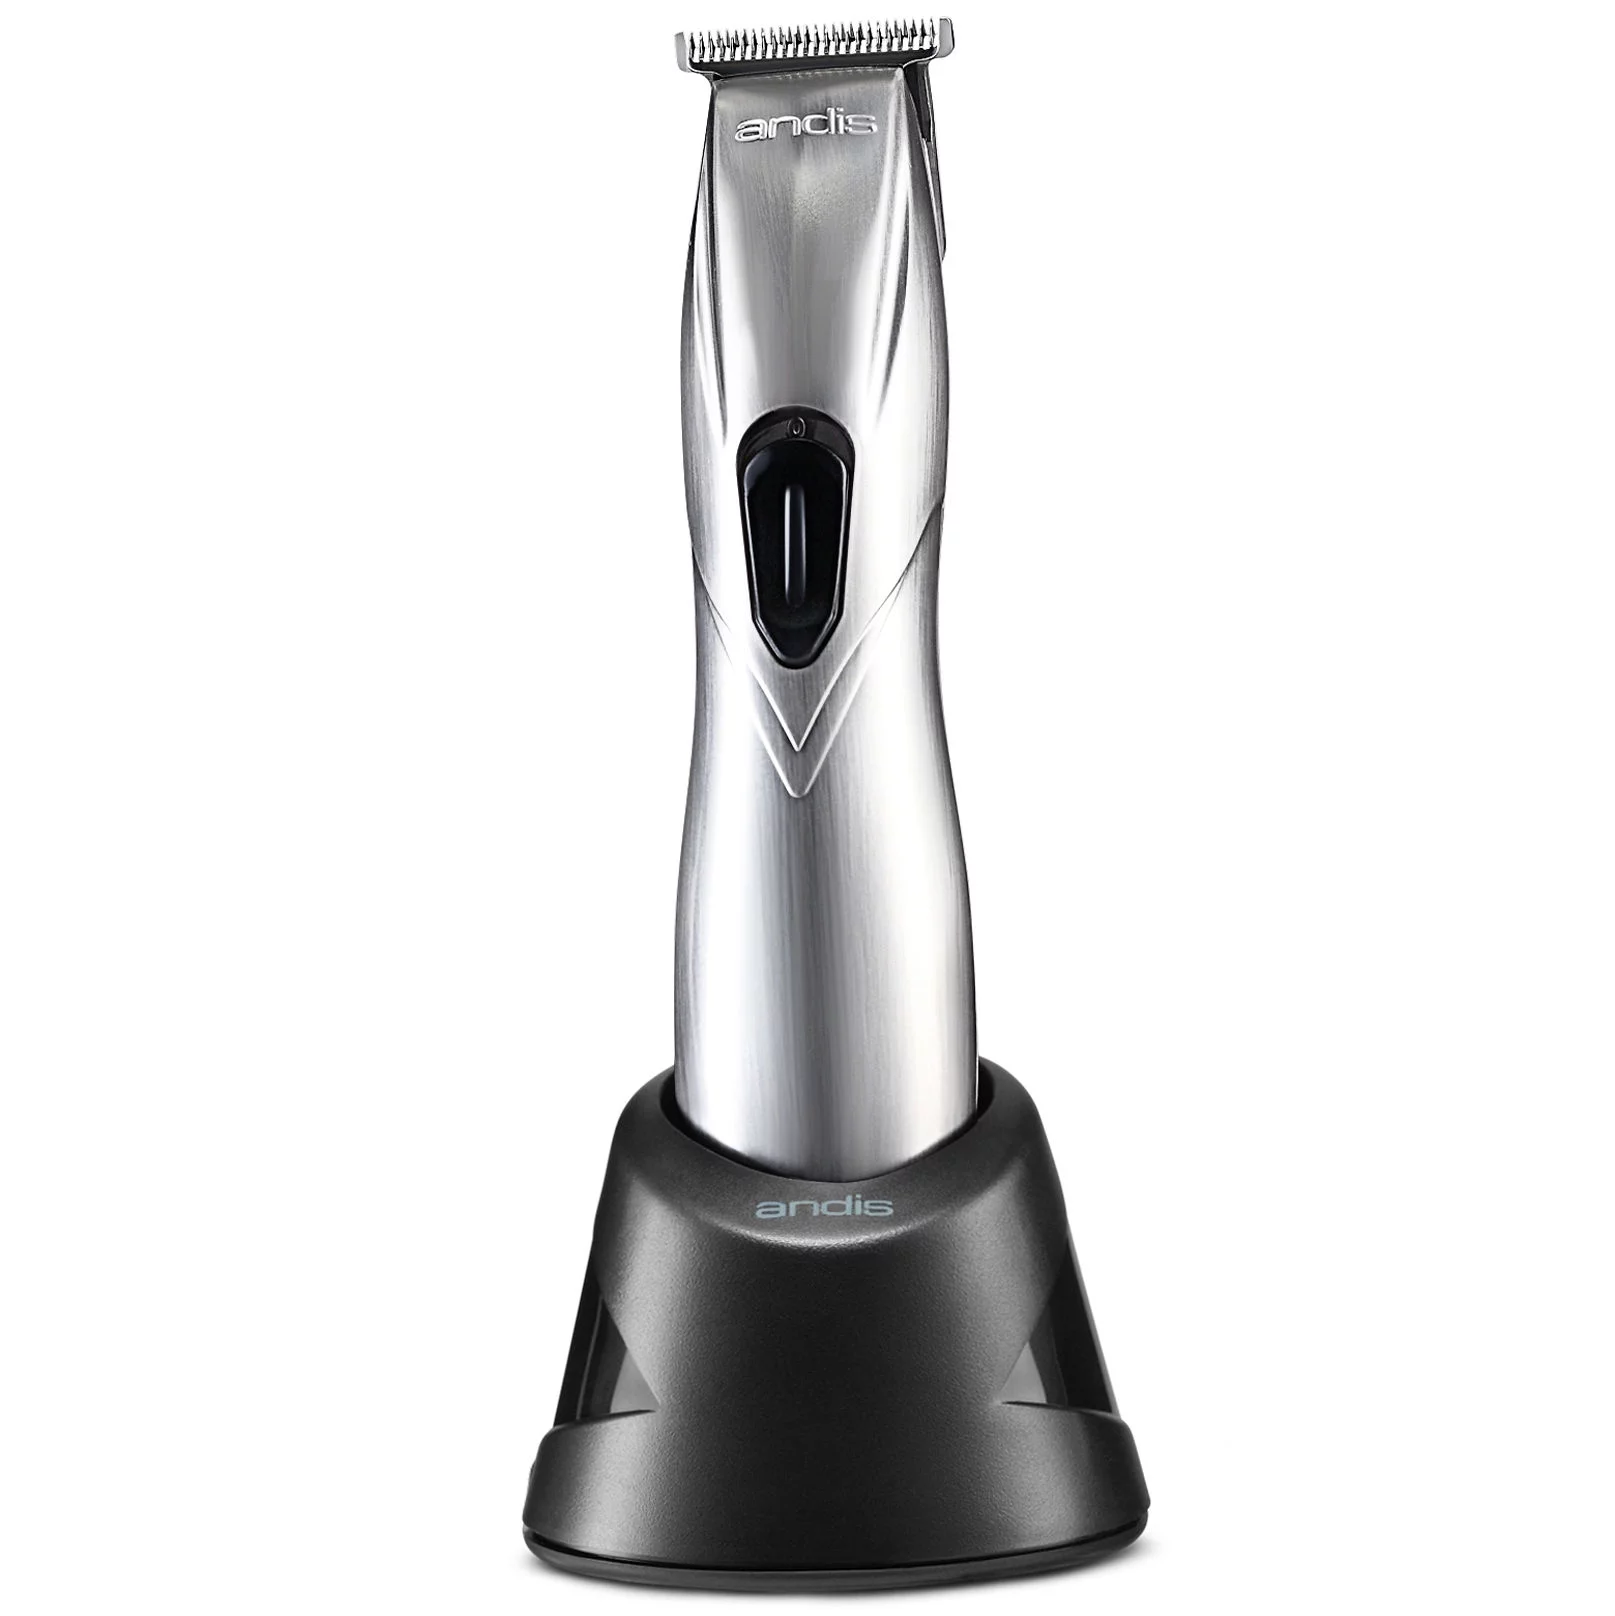 A silver and black electric hair trimmer on top of a stand.